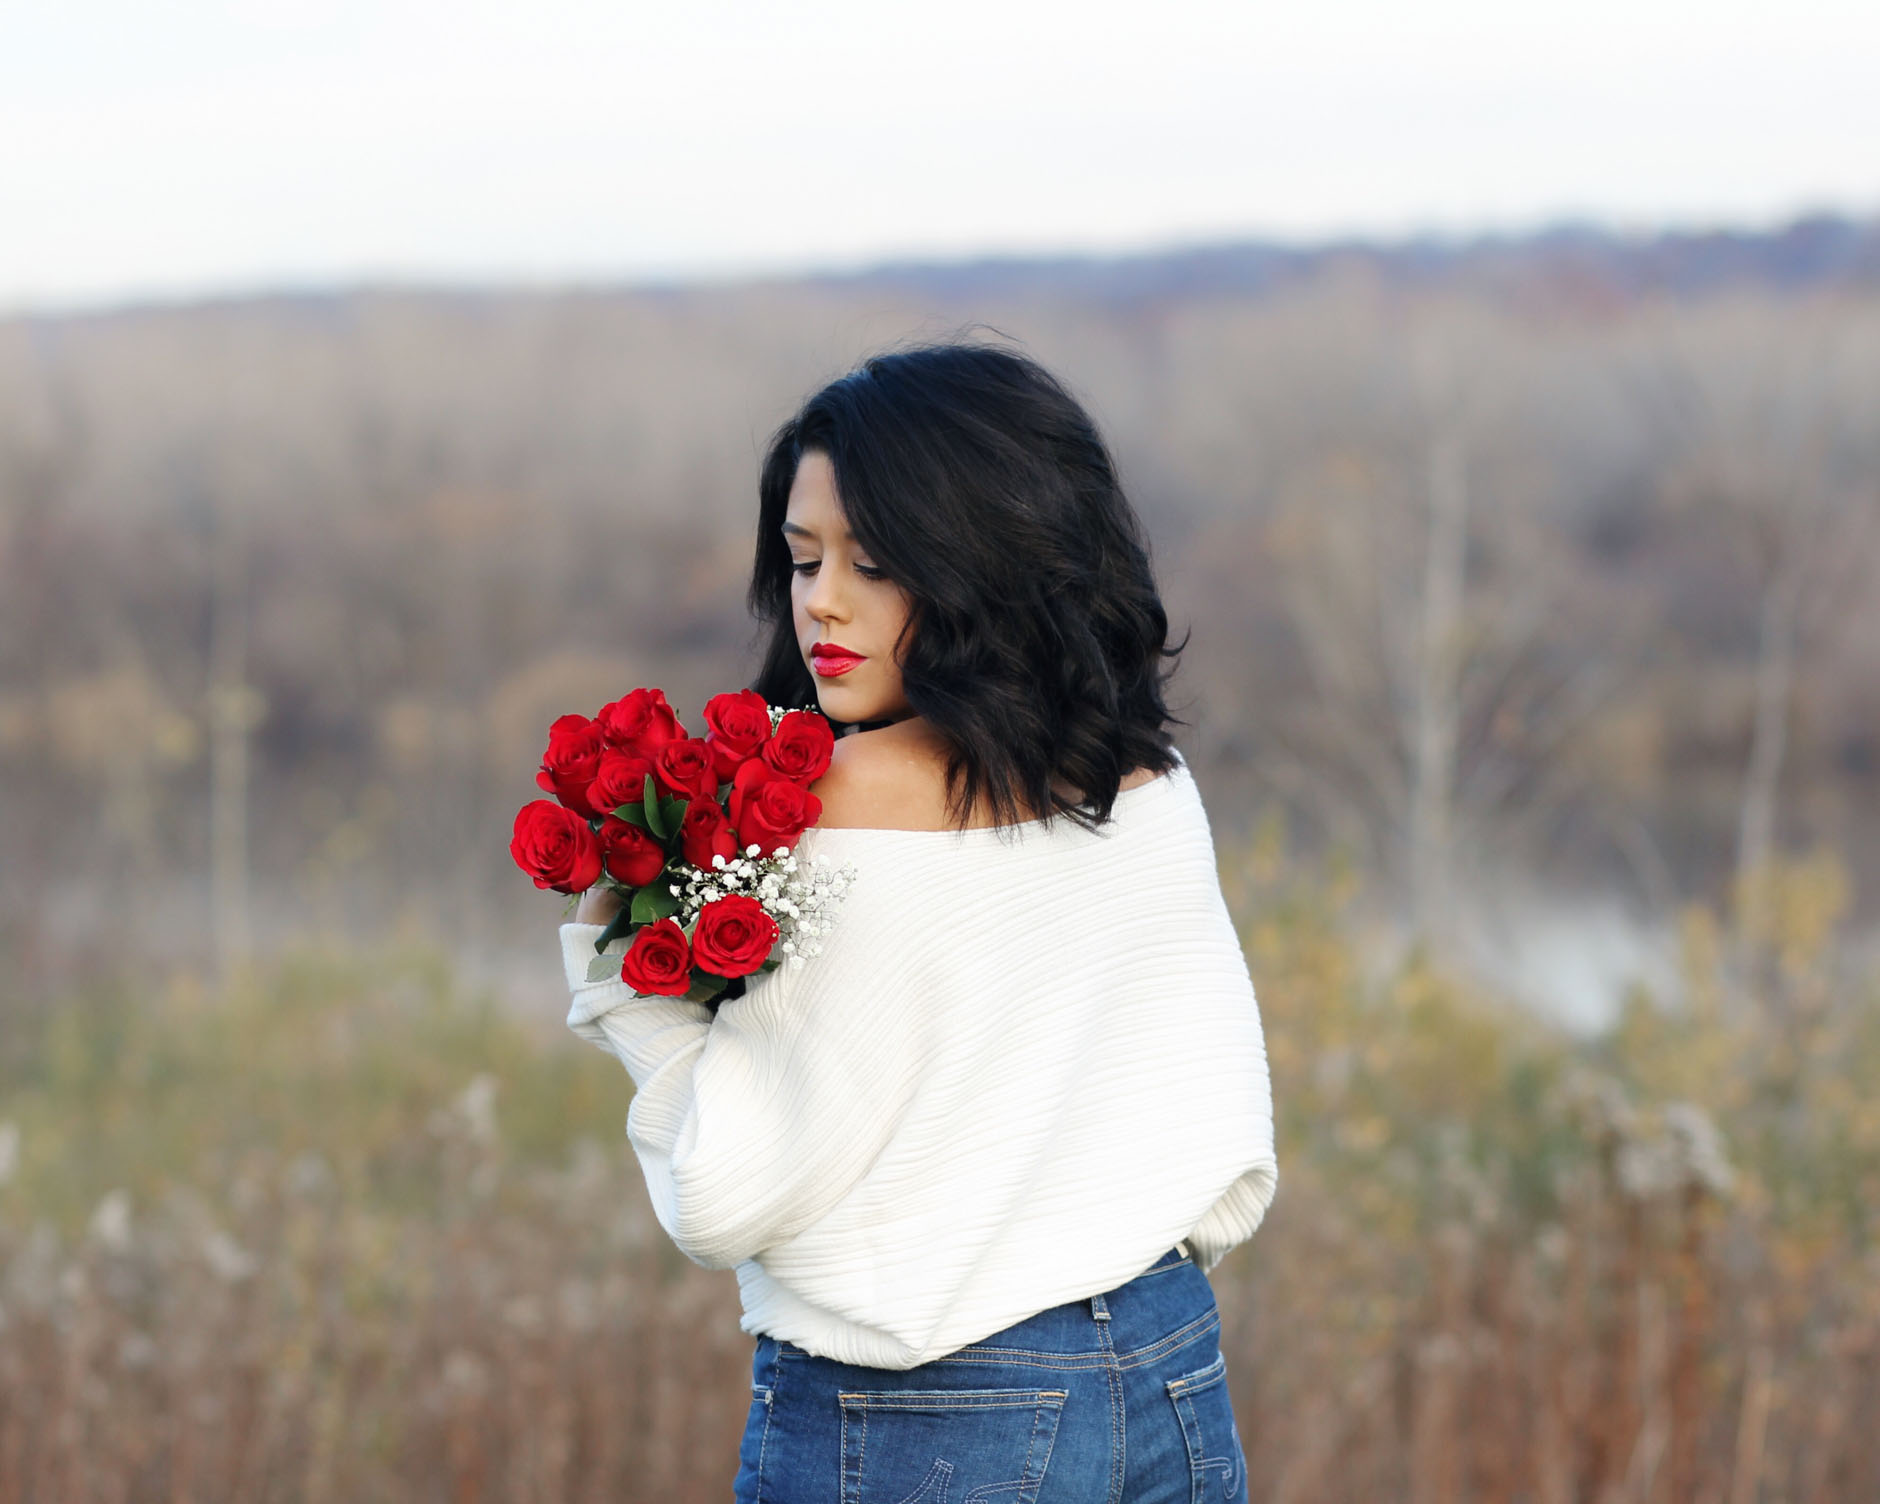 lifestyle blogger naty michele holding red roses